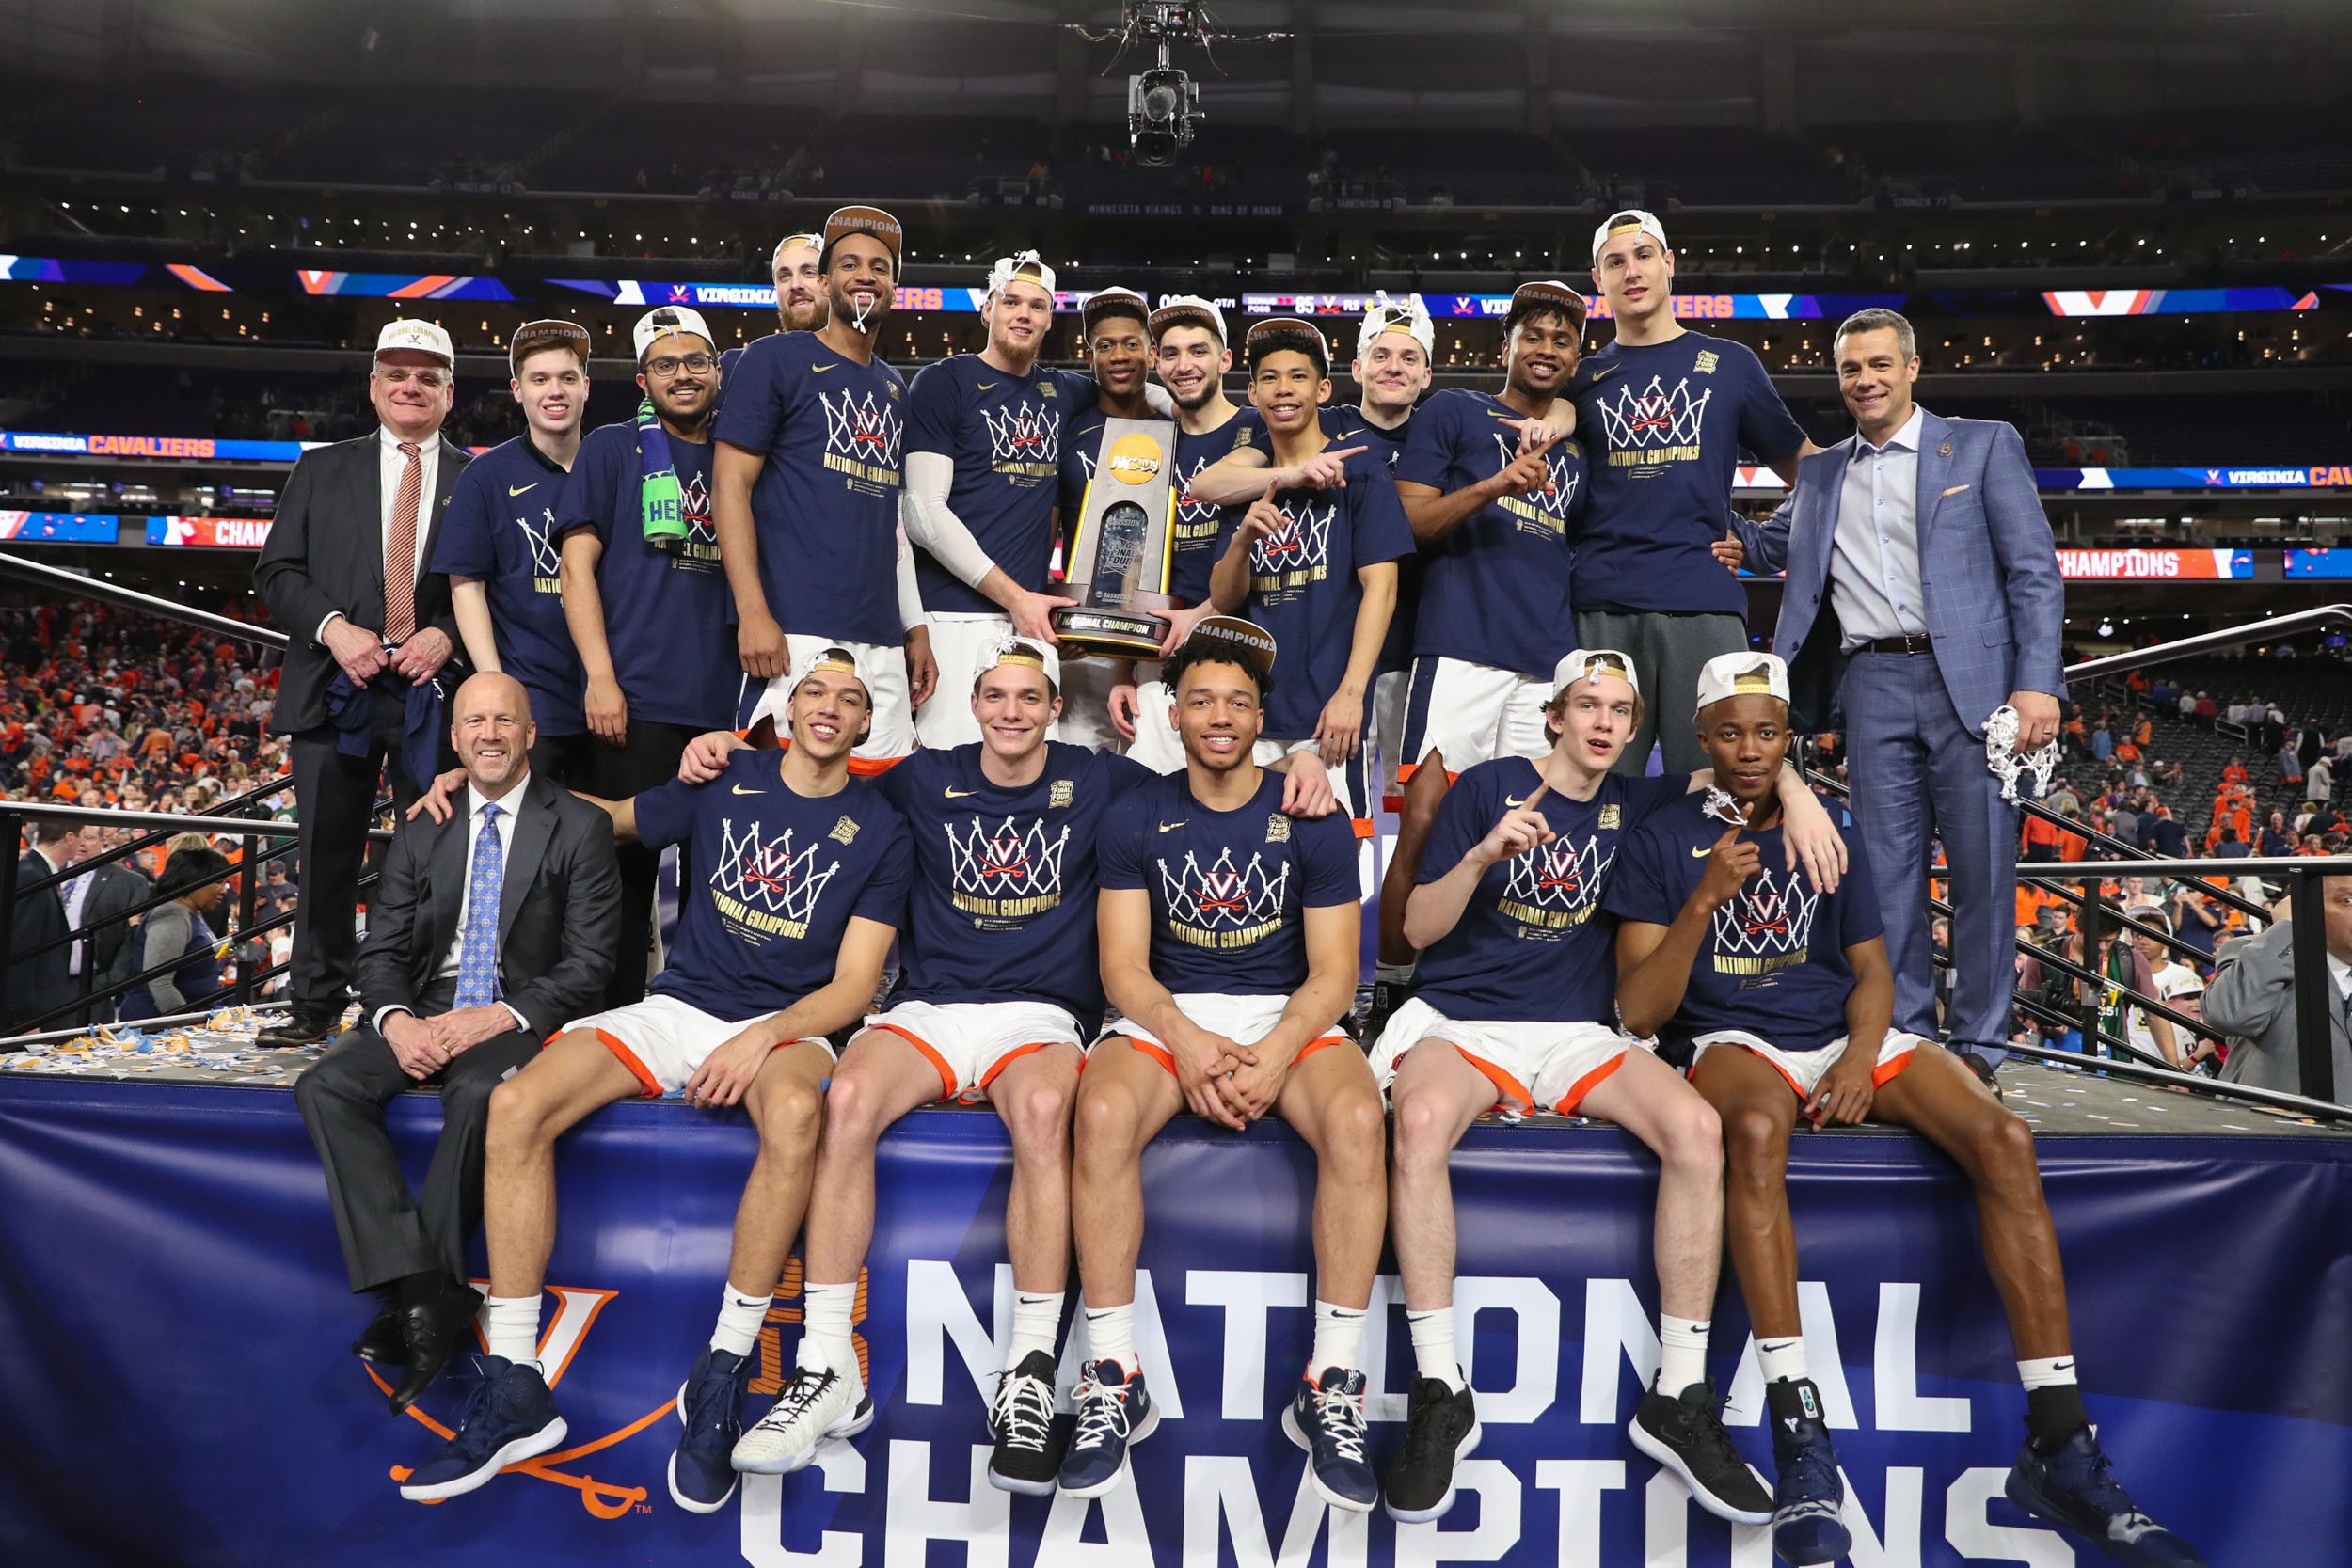 UVA basketball team sitting and standing on the Final Four stage holding the NCAA trophy